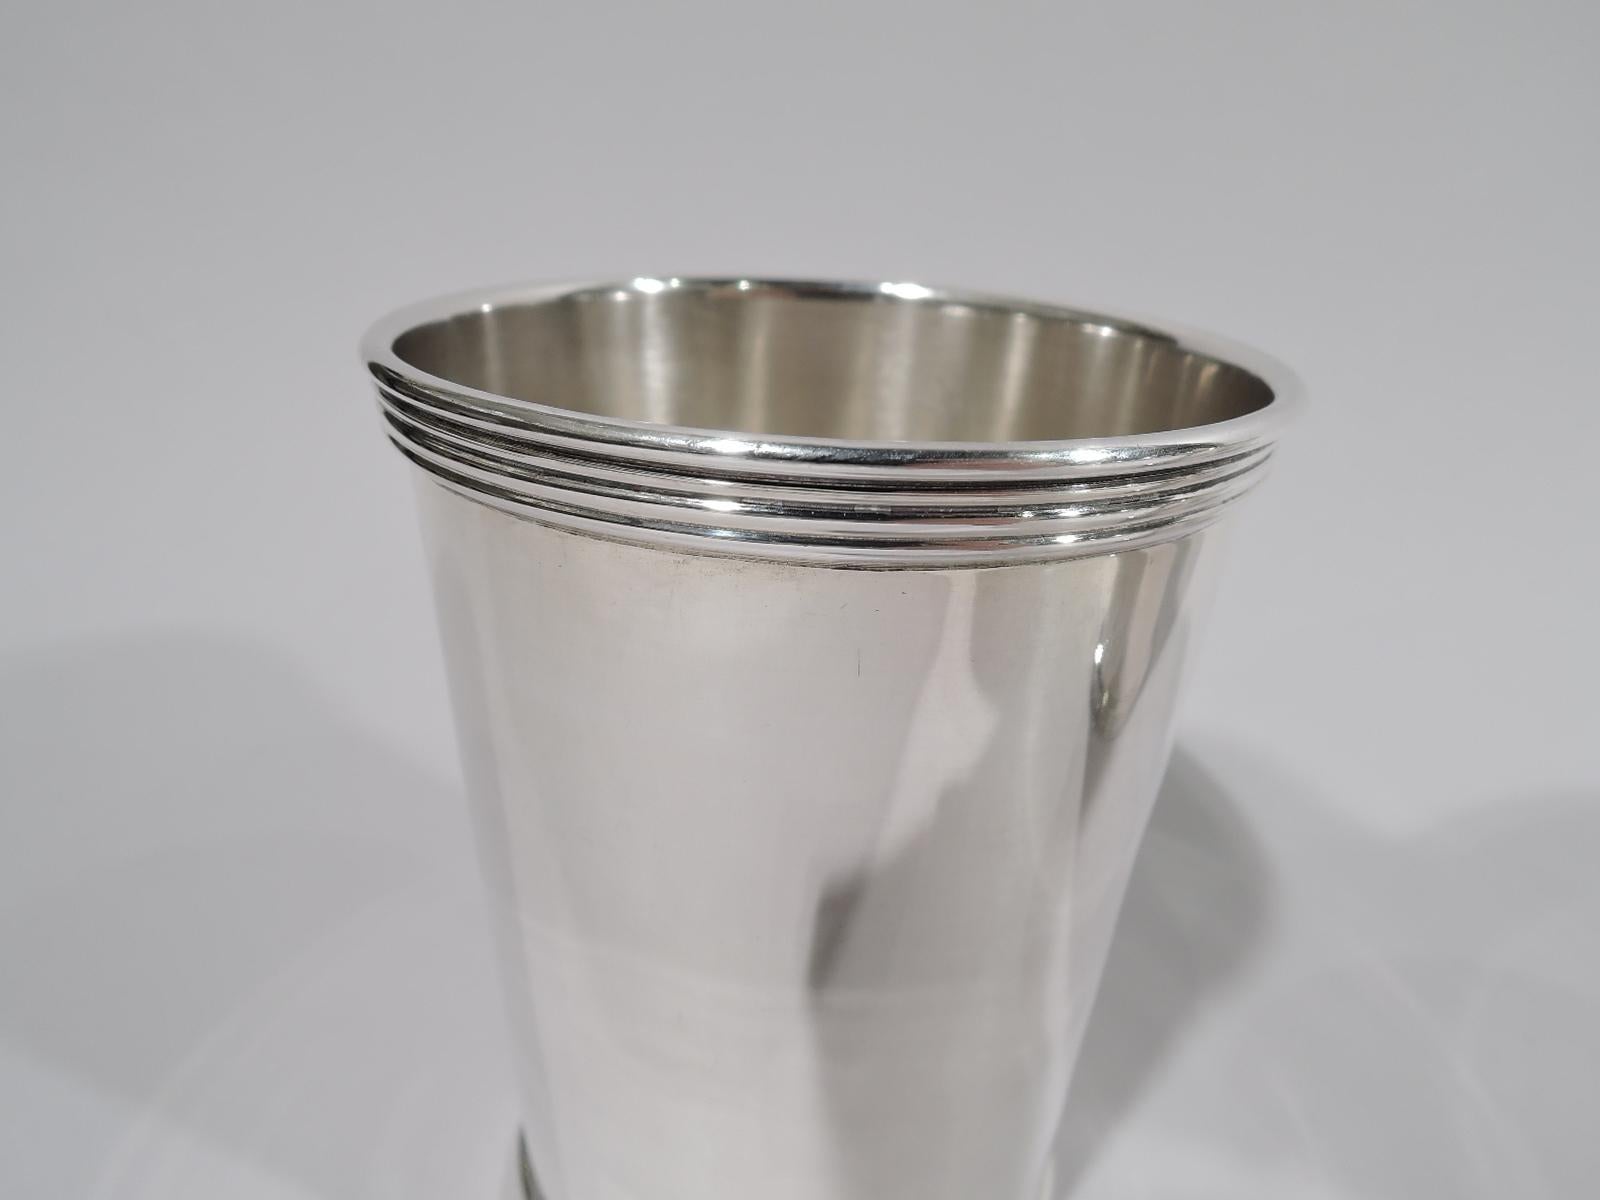 Set of 4 sterling silver mint juleps. Made by Wm Rogers Mfg Co. (part of International) in Hartford. Each: Straight and tapering sides, and reeded rim and base. A quartet of cups for a select Derby Day celebration. Fully marked. Two cups numbered